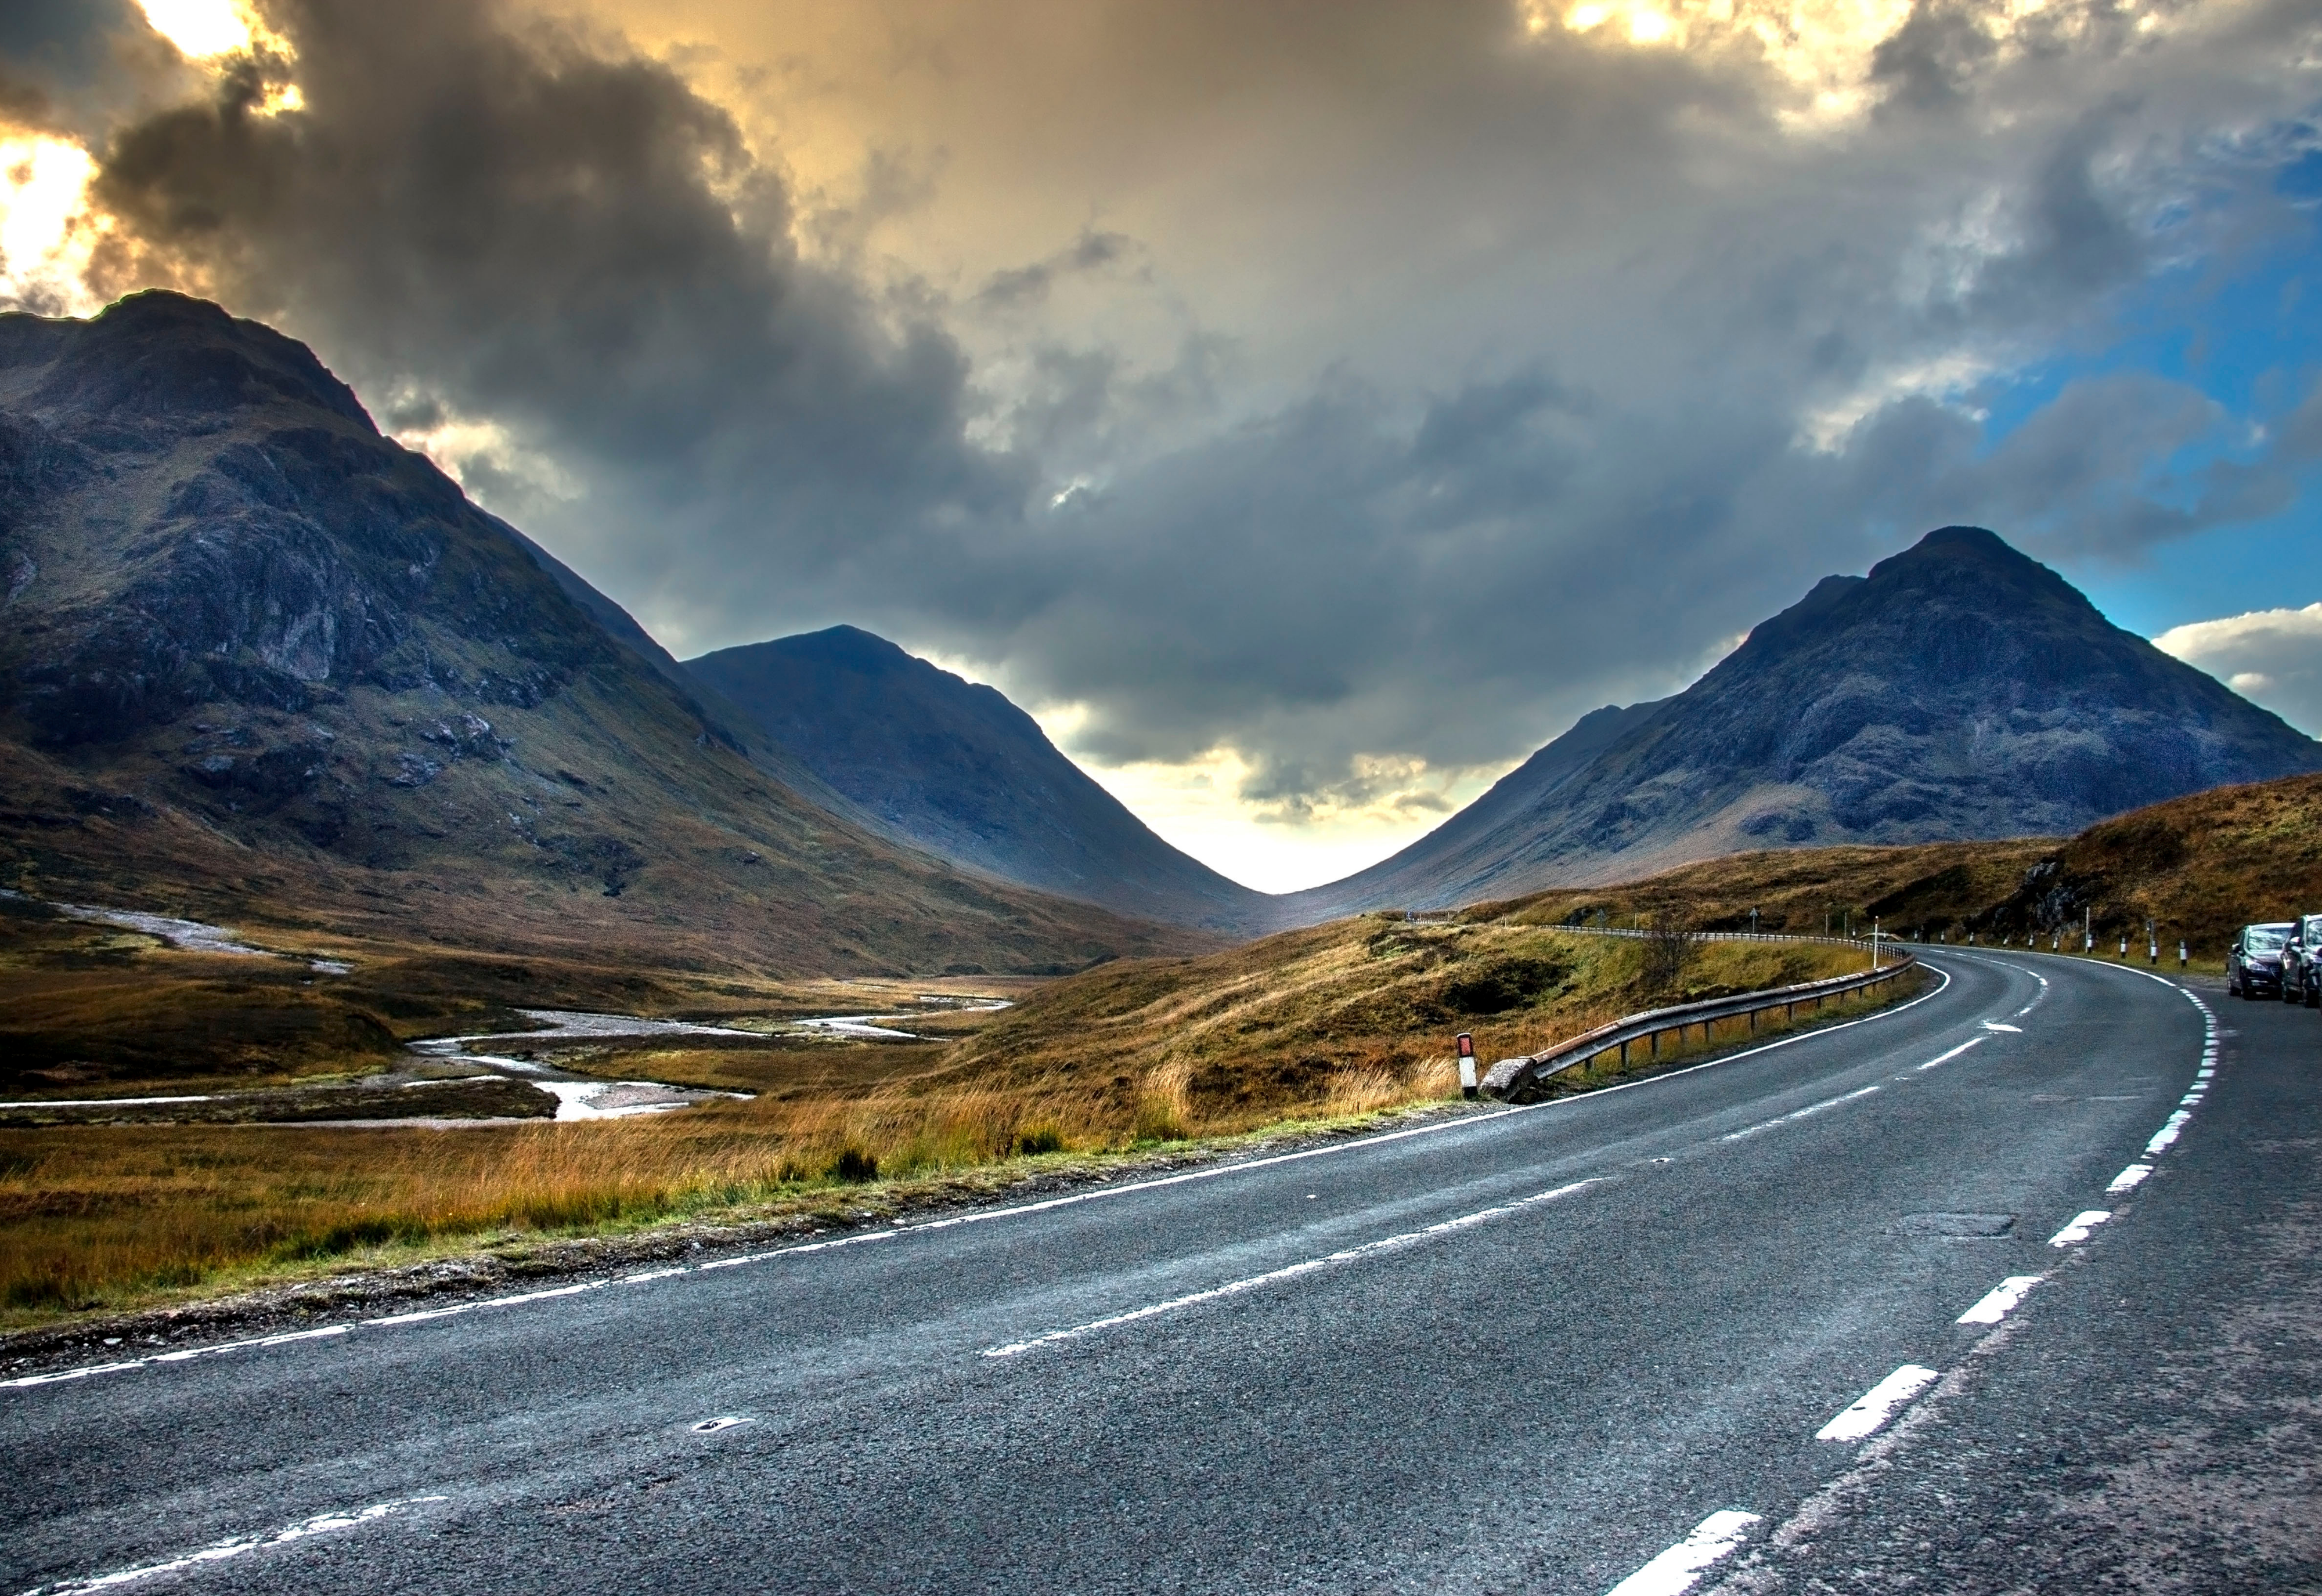 The A82 in Scotland at sunset, as an example of the roads seen by contractors working HGV driving jobs.